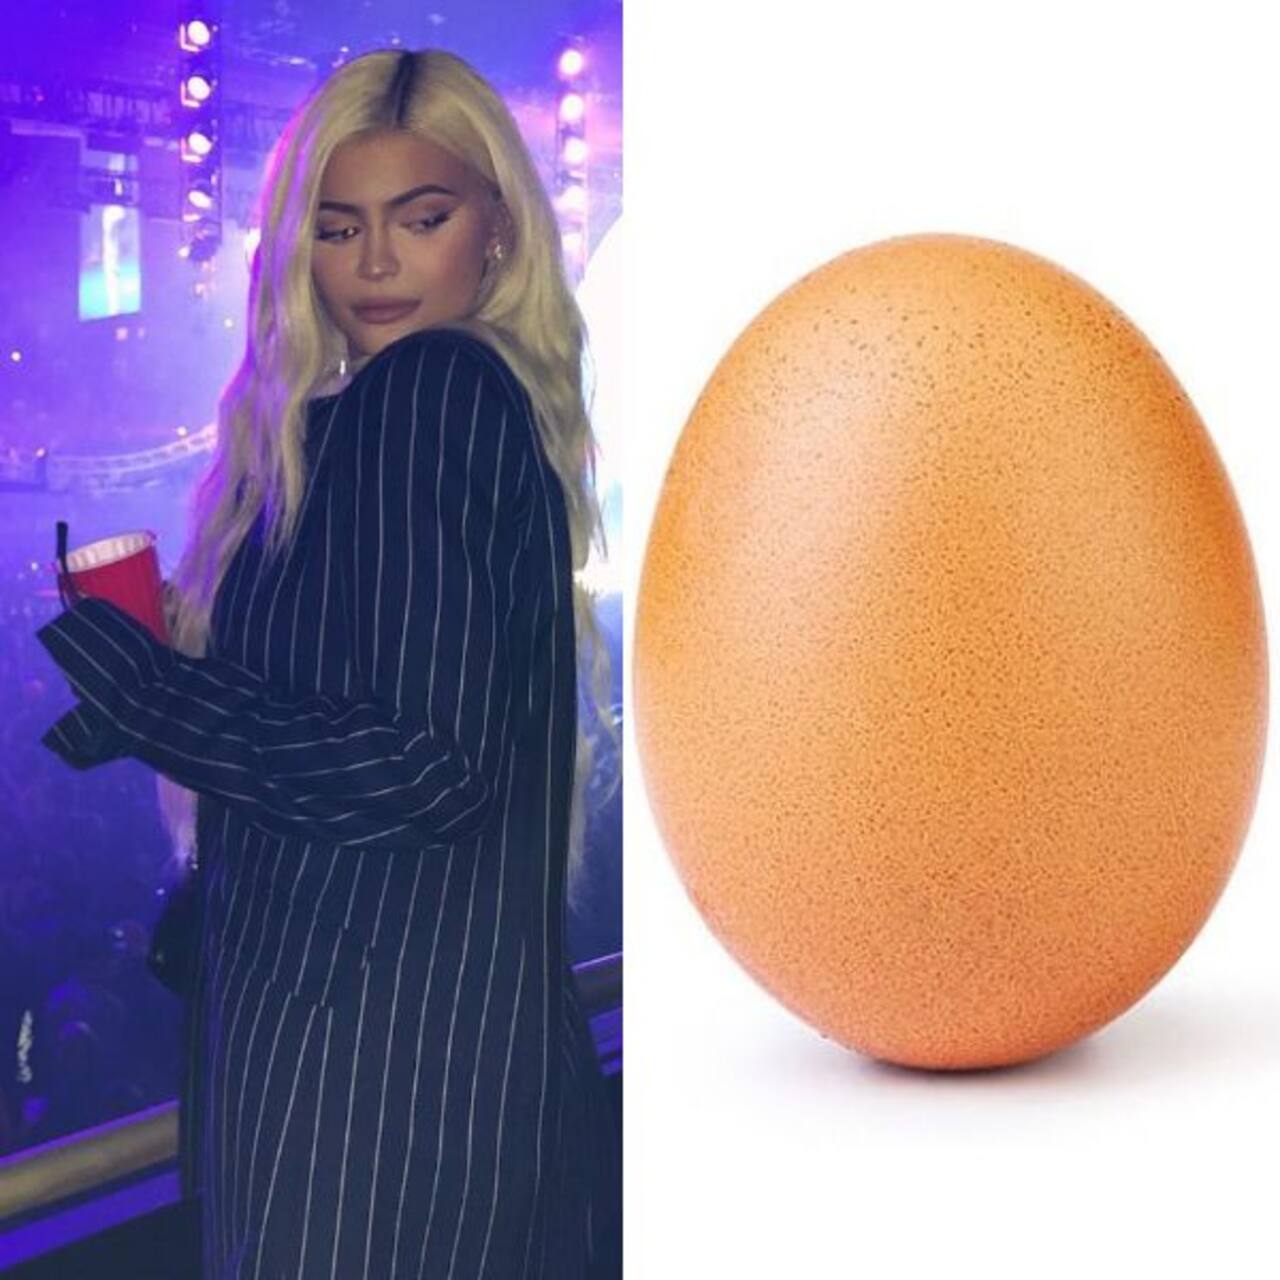 Believe it or not! An EGG has shattered Kylie Jenner's world record - here's how